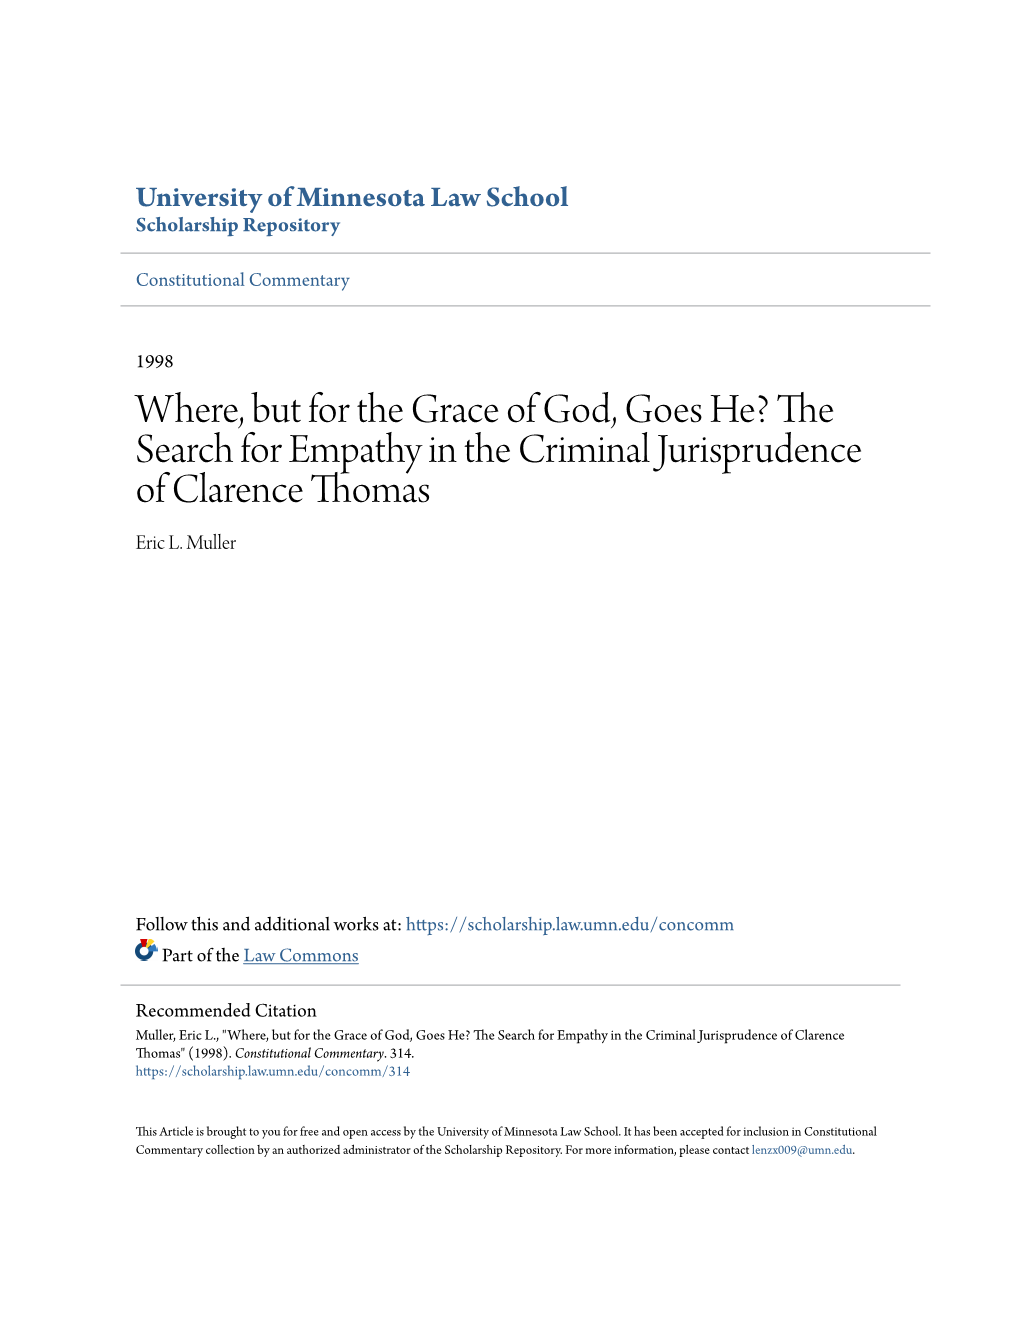 Where, but for the Grace of God, Goes He? the Search for Empathy in the Criminal Jurisprudence of Clarence Thomas Eric L